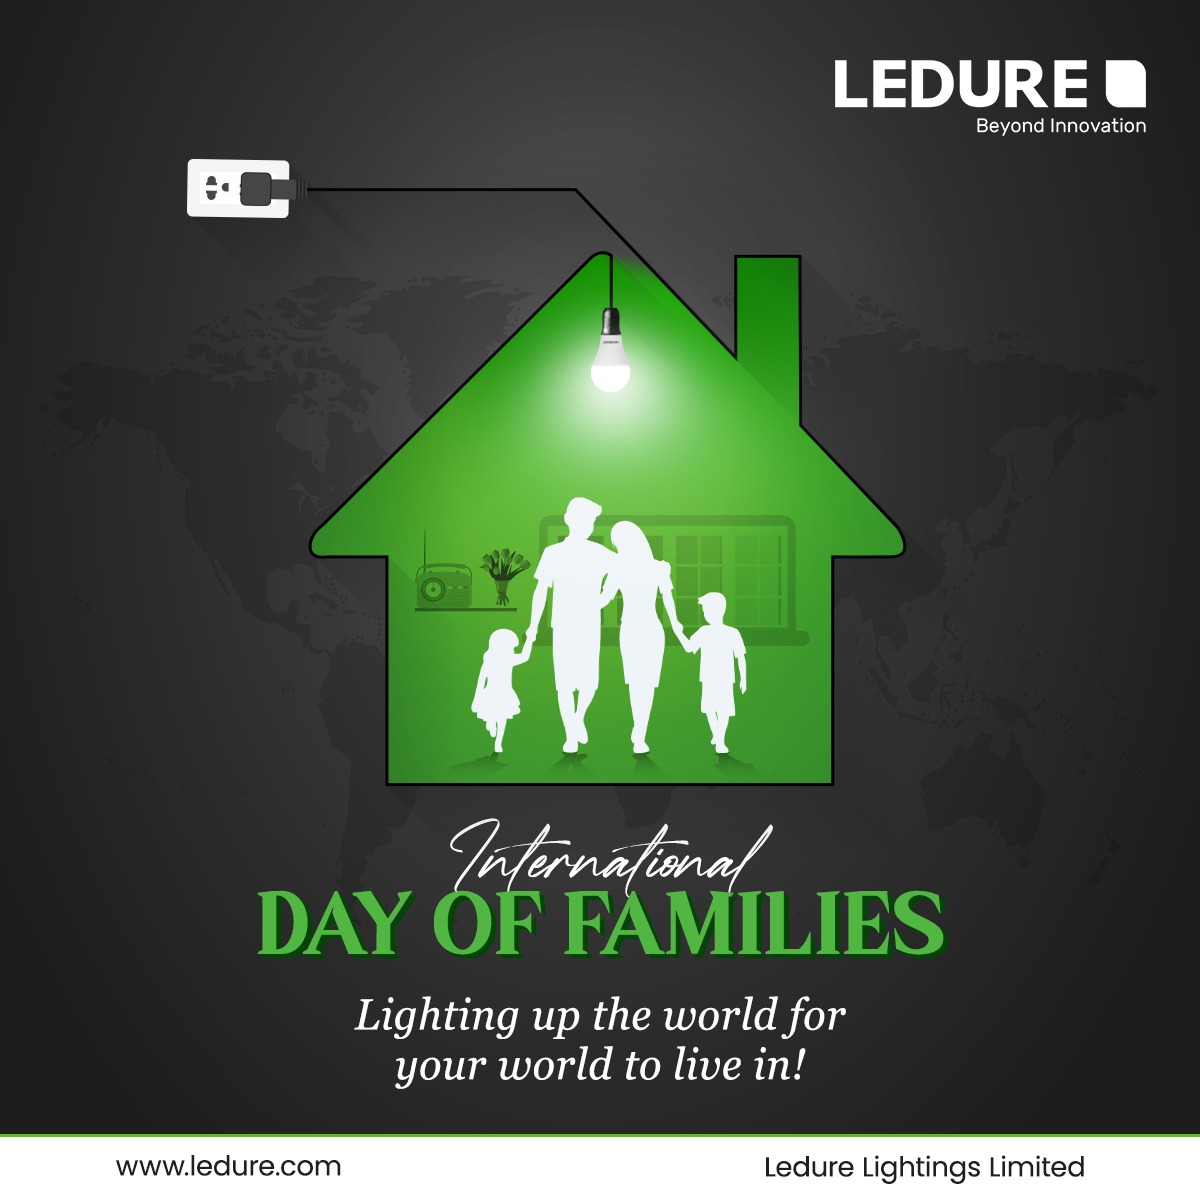 Shining a light on love, laughter, and togetherness. Happy International Day of Families from Ledure Lighting Limited, illuminating your world for a brighter tomorrow. 💫

#LightingTheWorld #MyLedure #familyday #familiestogether #families #internationaldayoffamilies